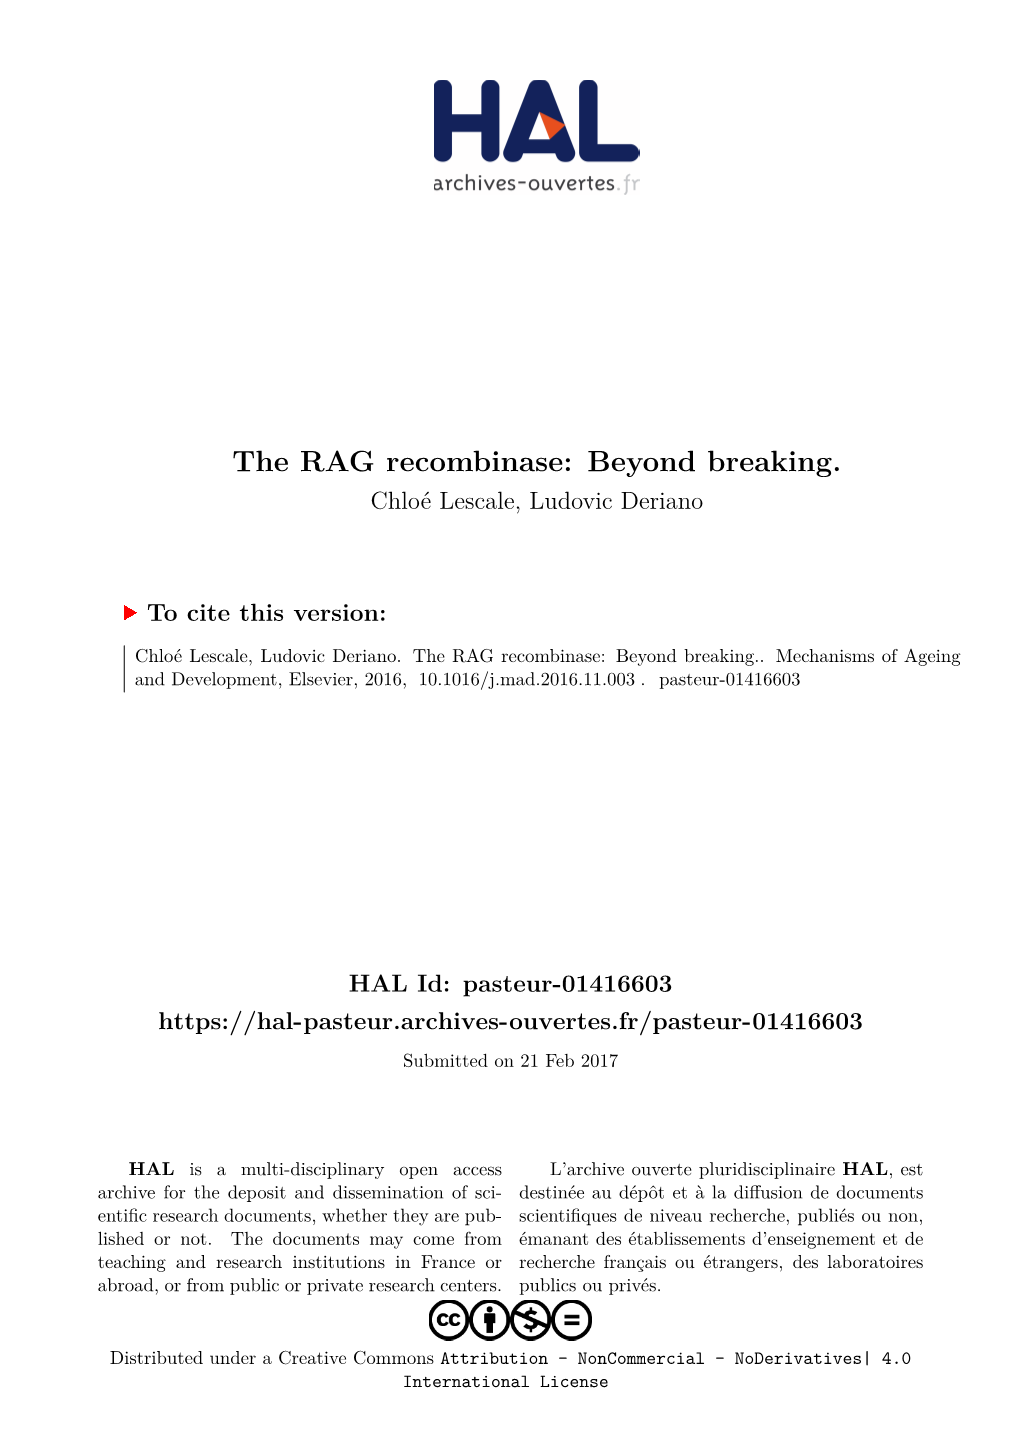 The RAG Recombinase: Beyond Breaking. Chloé Lescale, Ludovic Deriano